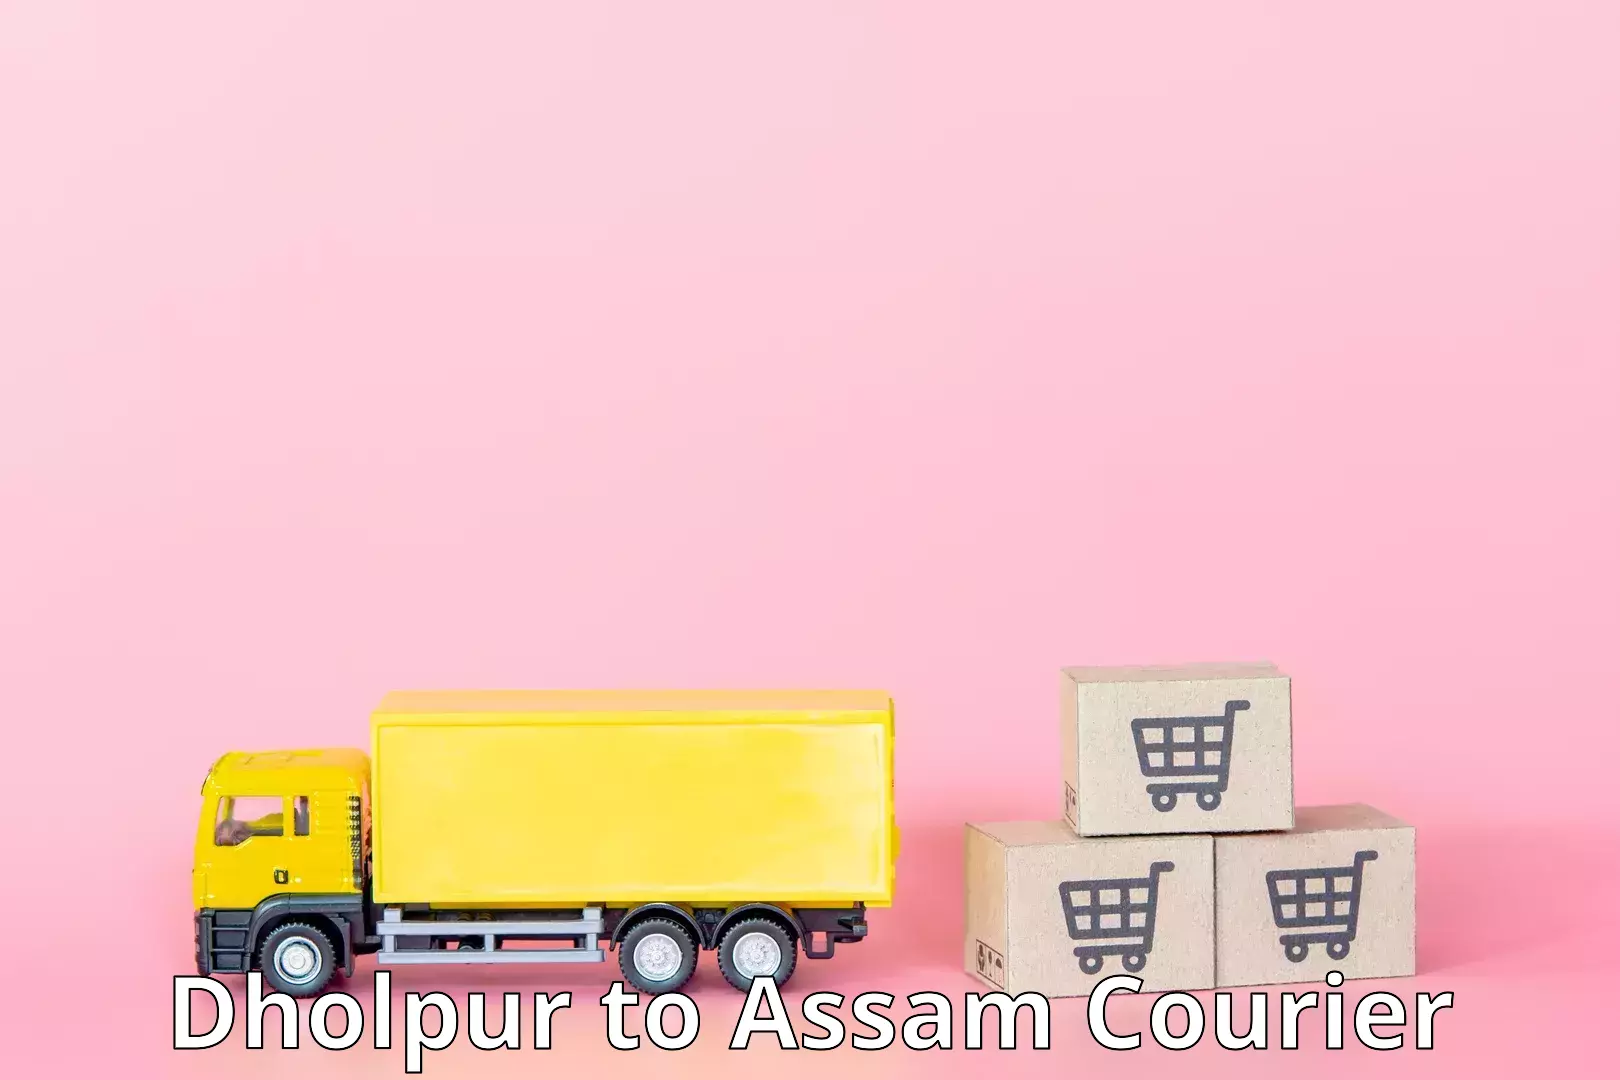 On-demand shipping options Dholpur to Assam